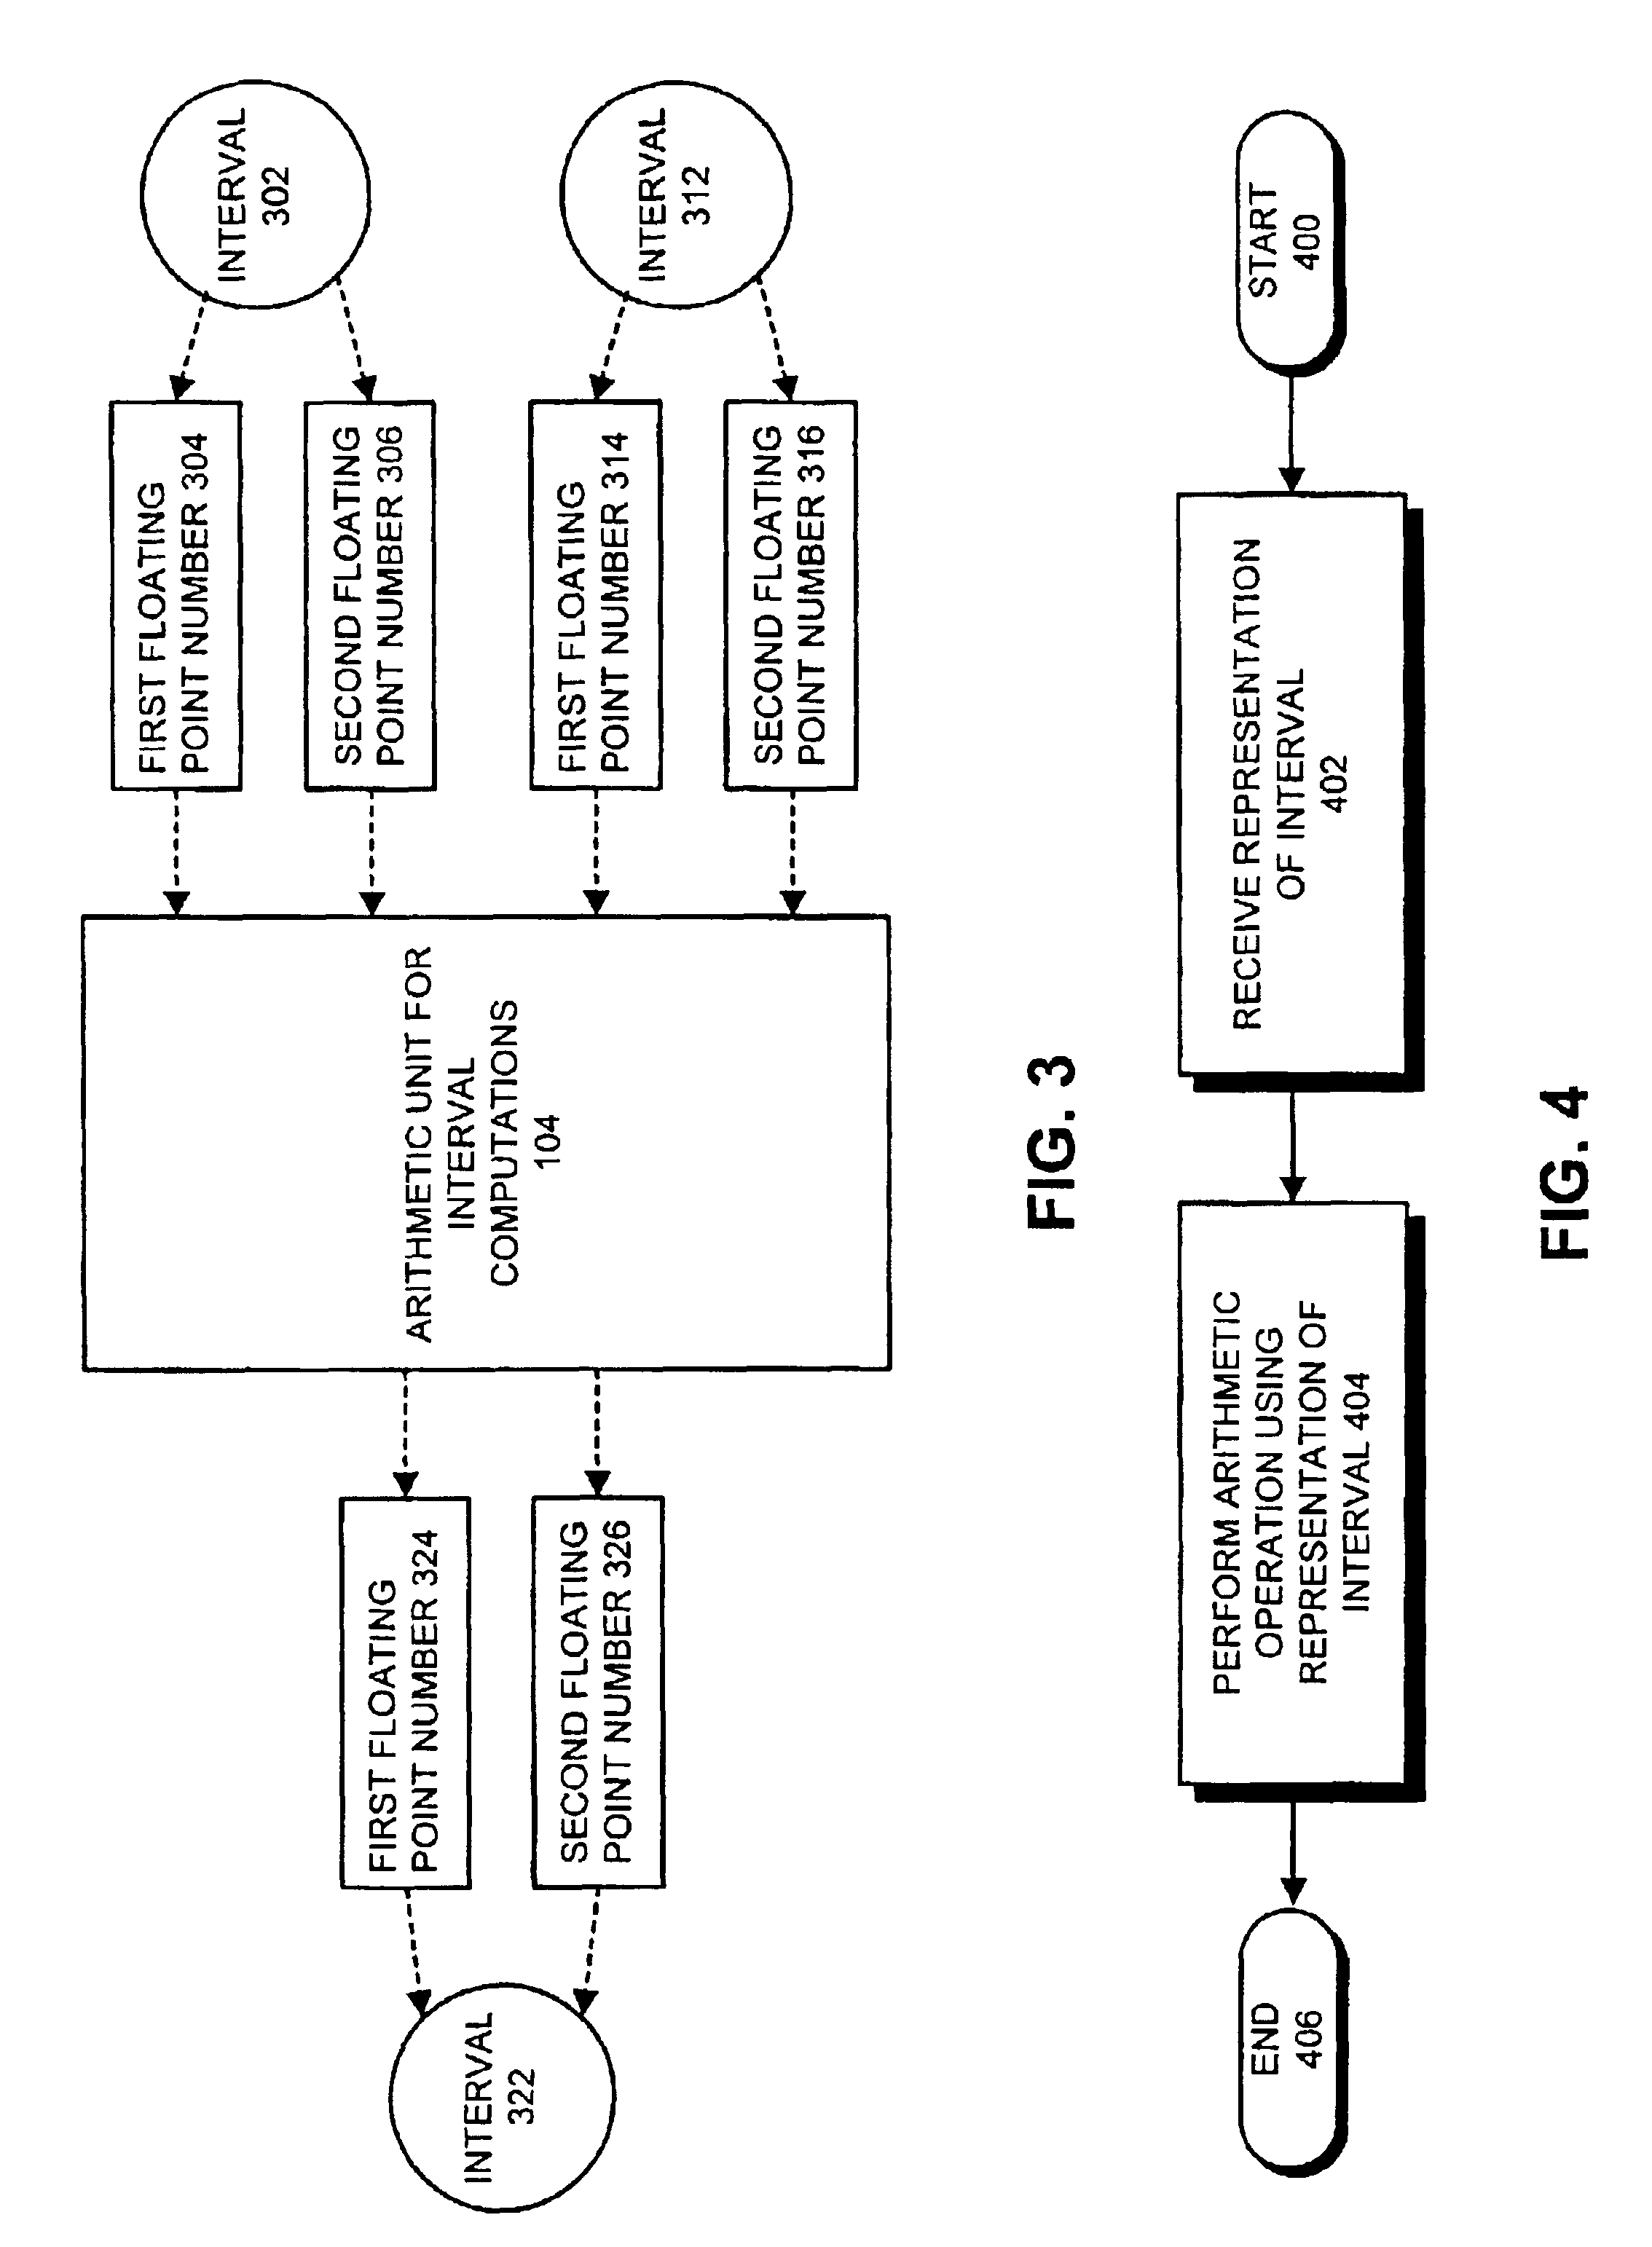 Method and apparatus for computing roots of a polynomial equation with interval coefficients